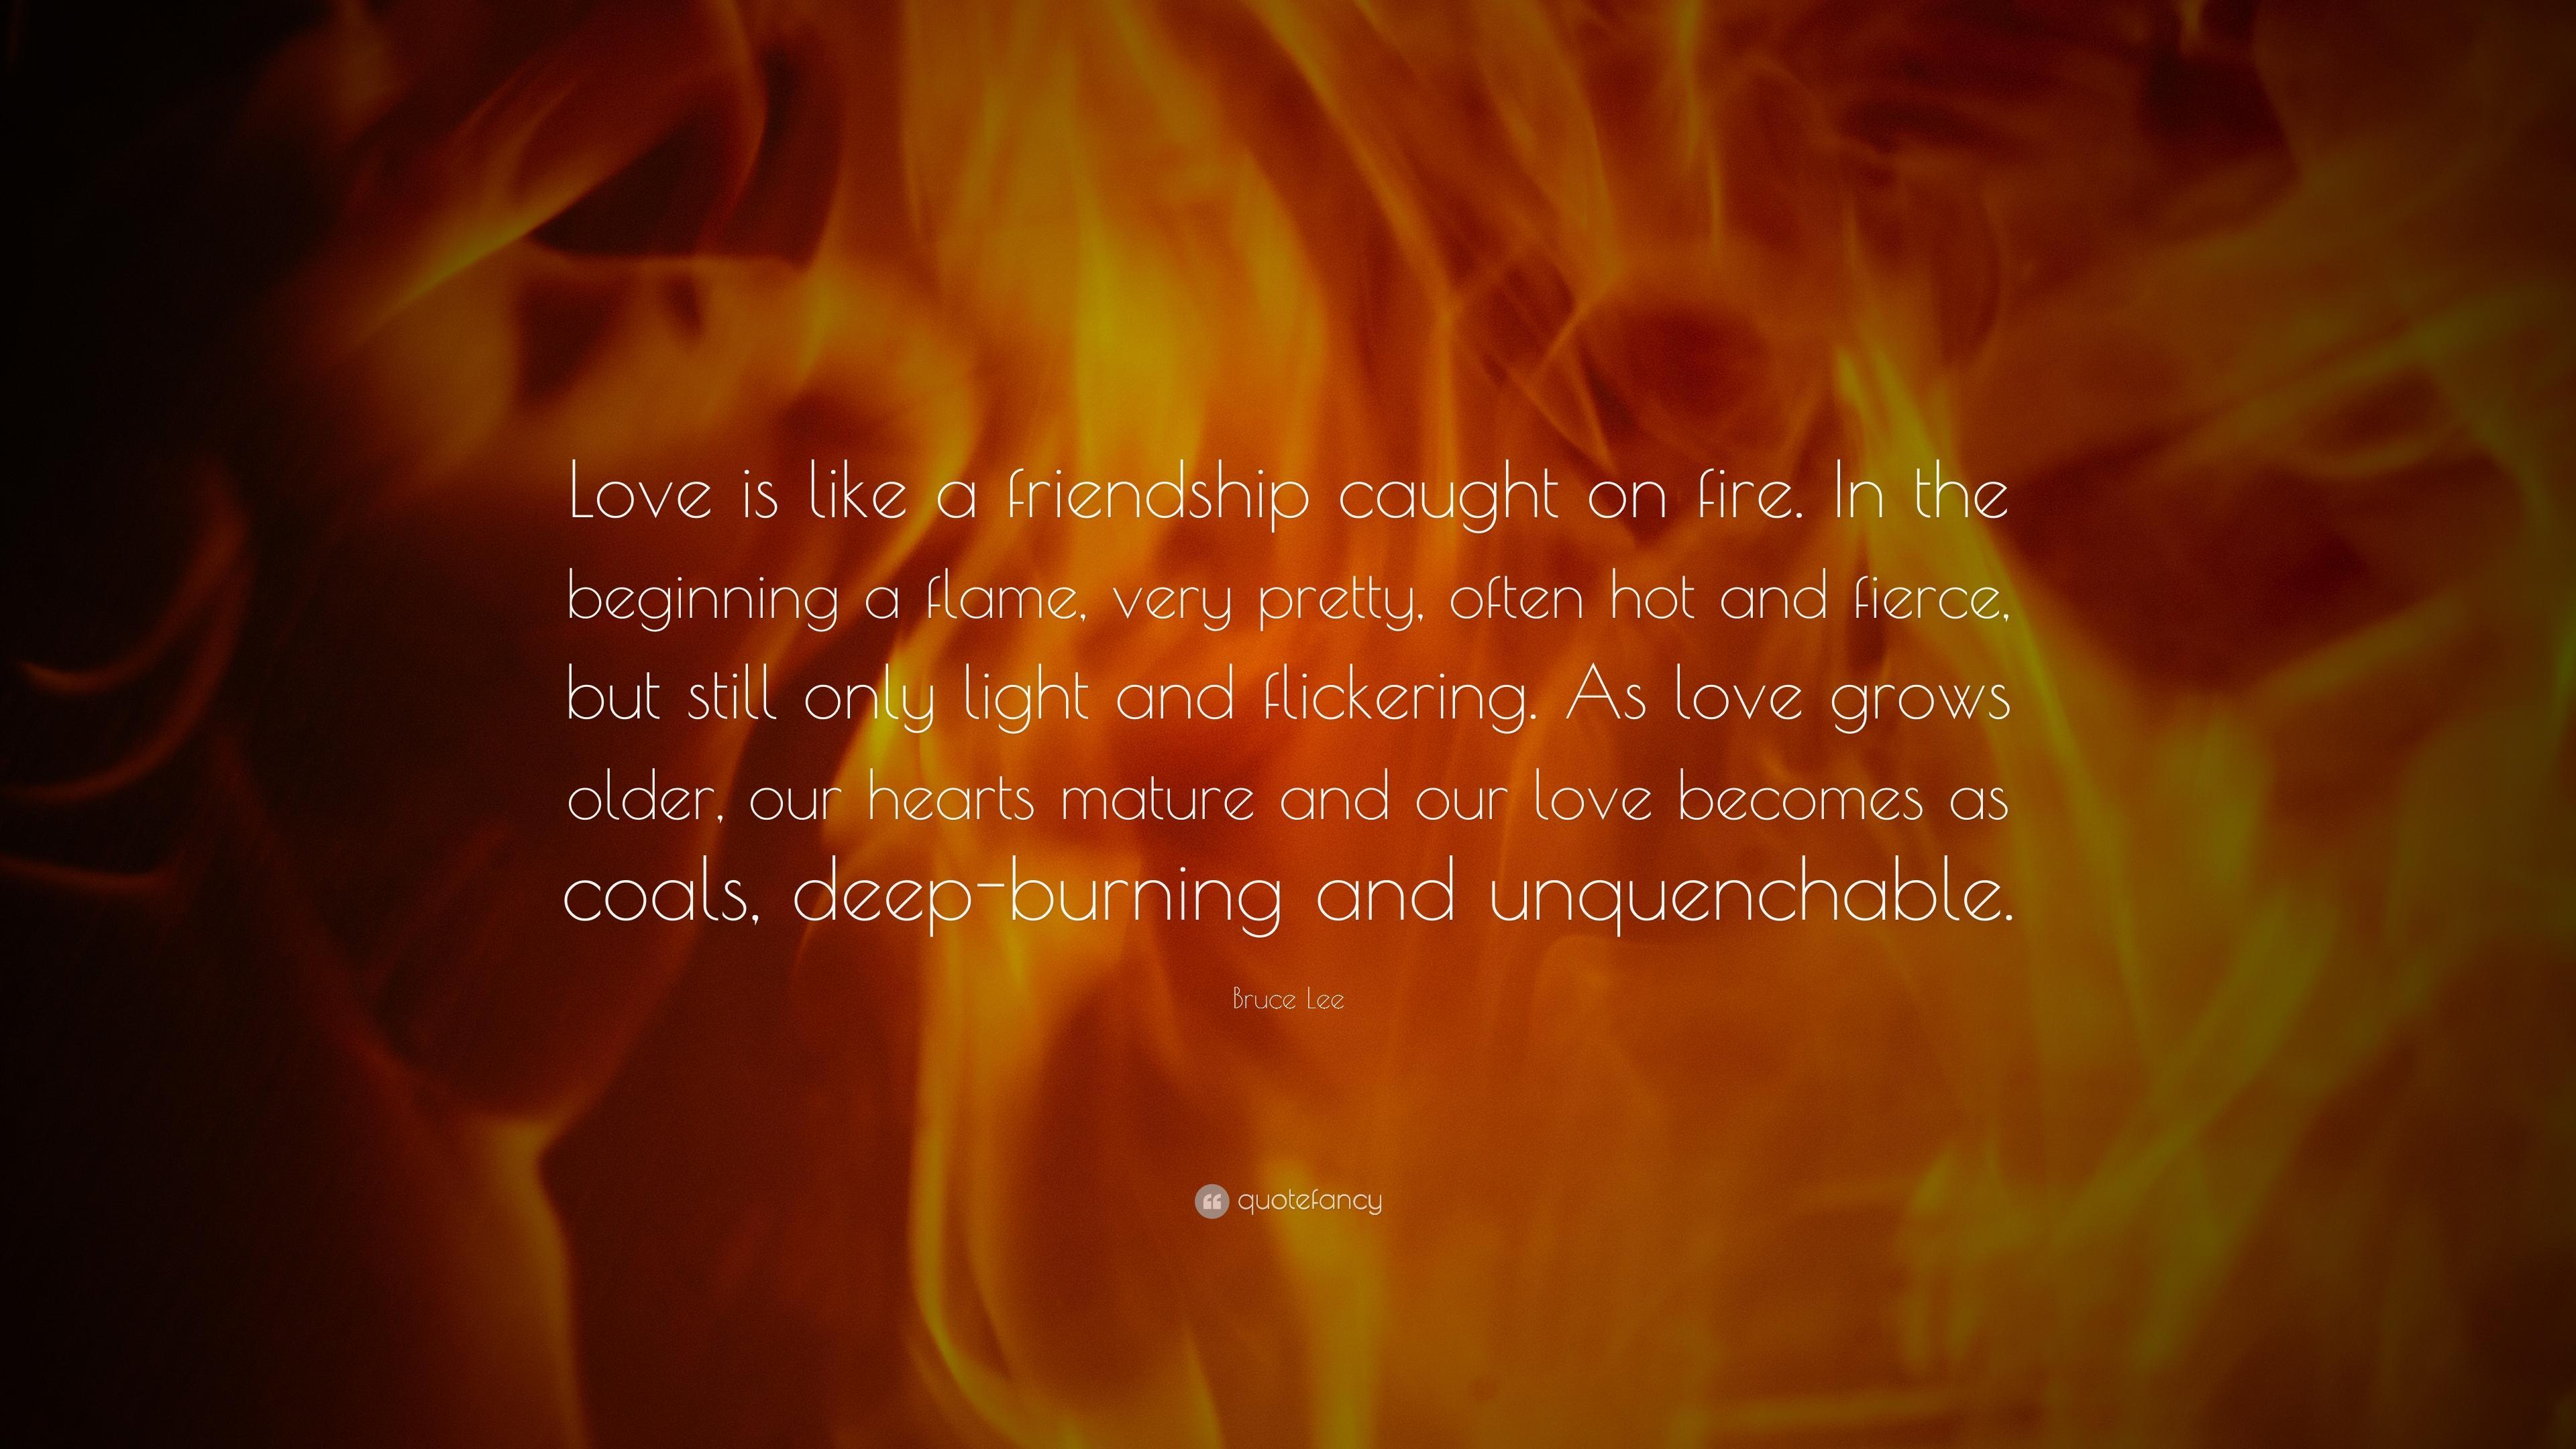 Bruce Lee Quote: “Love is like a friendship caught on fire. In